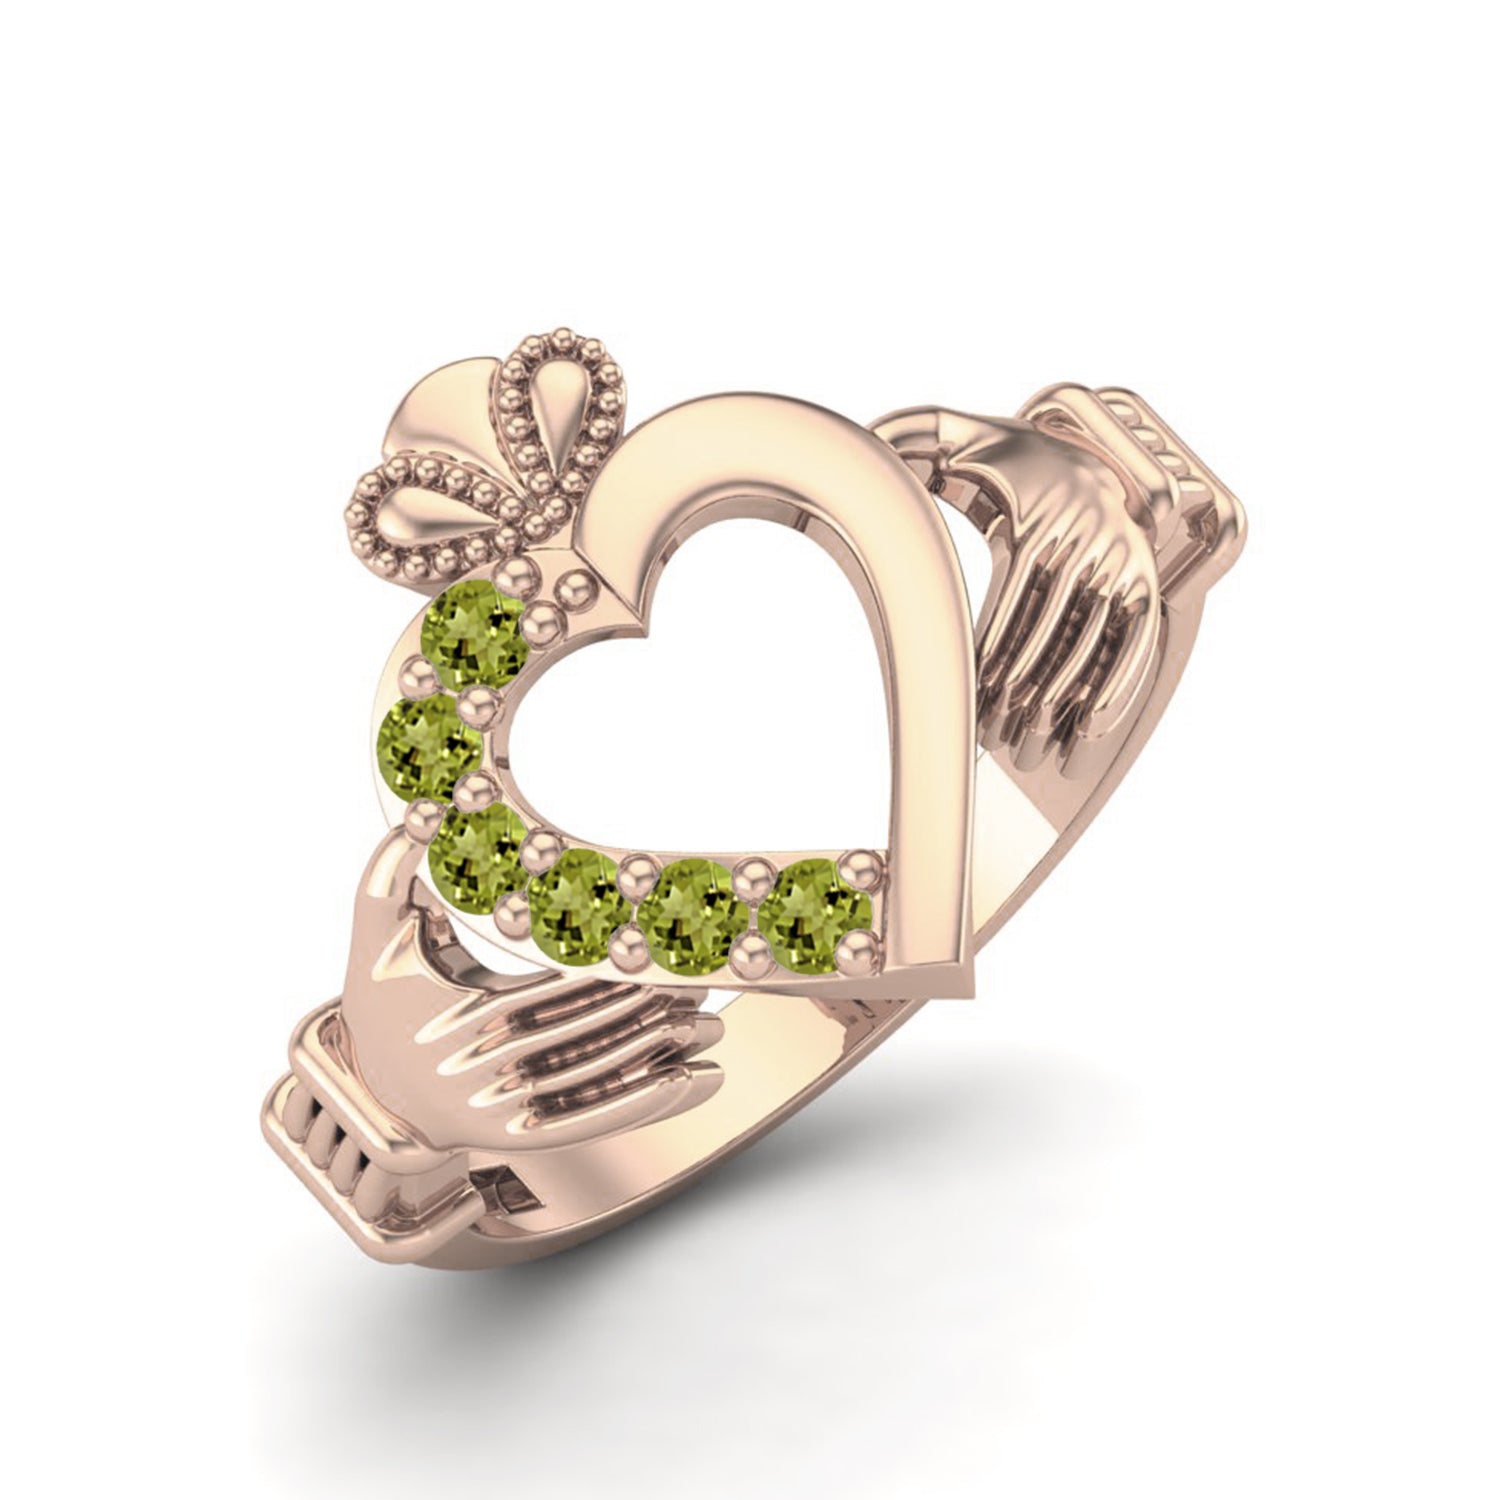 Claddagh Ring Store - Irish Claddagh Rings - In-Stock ✓– CladdaghRING.com